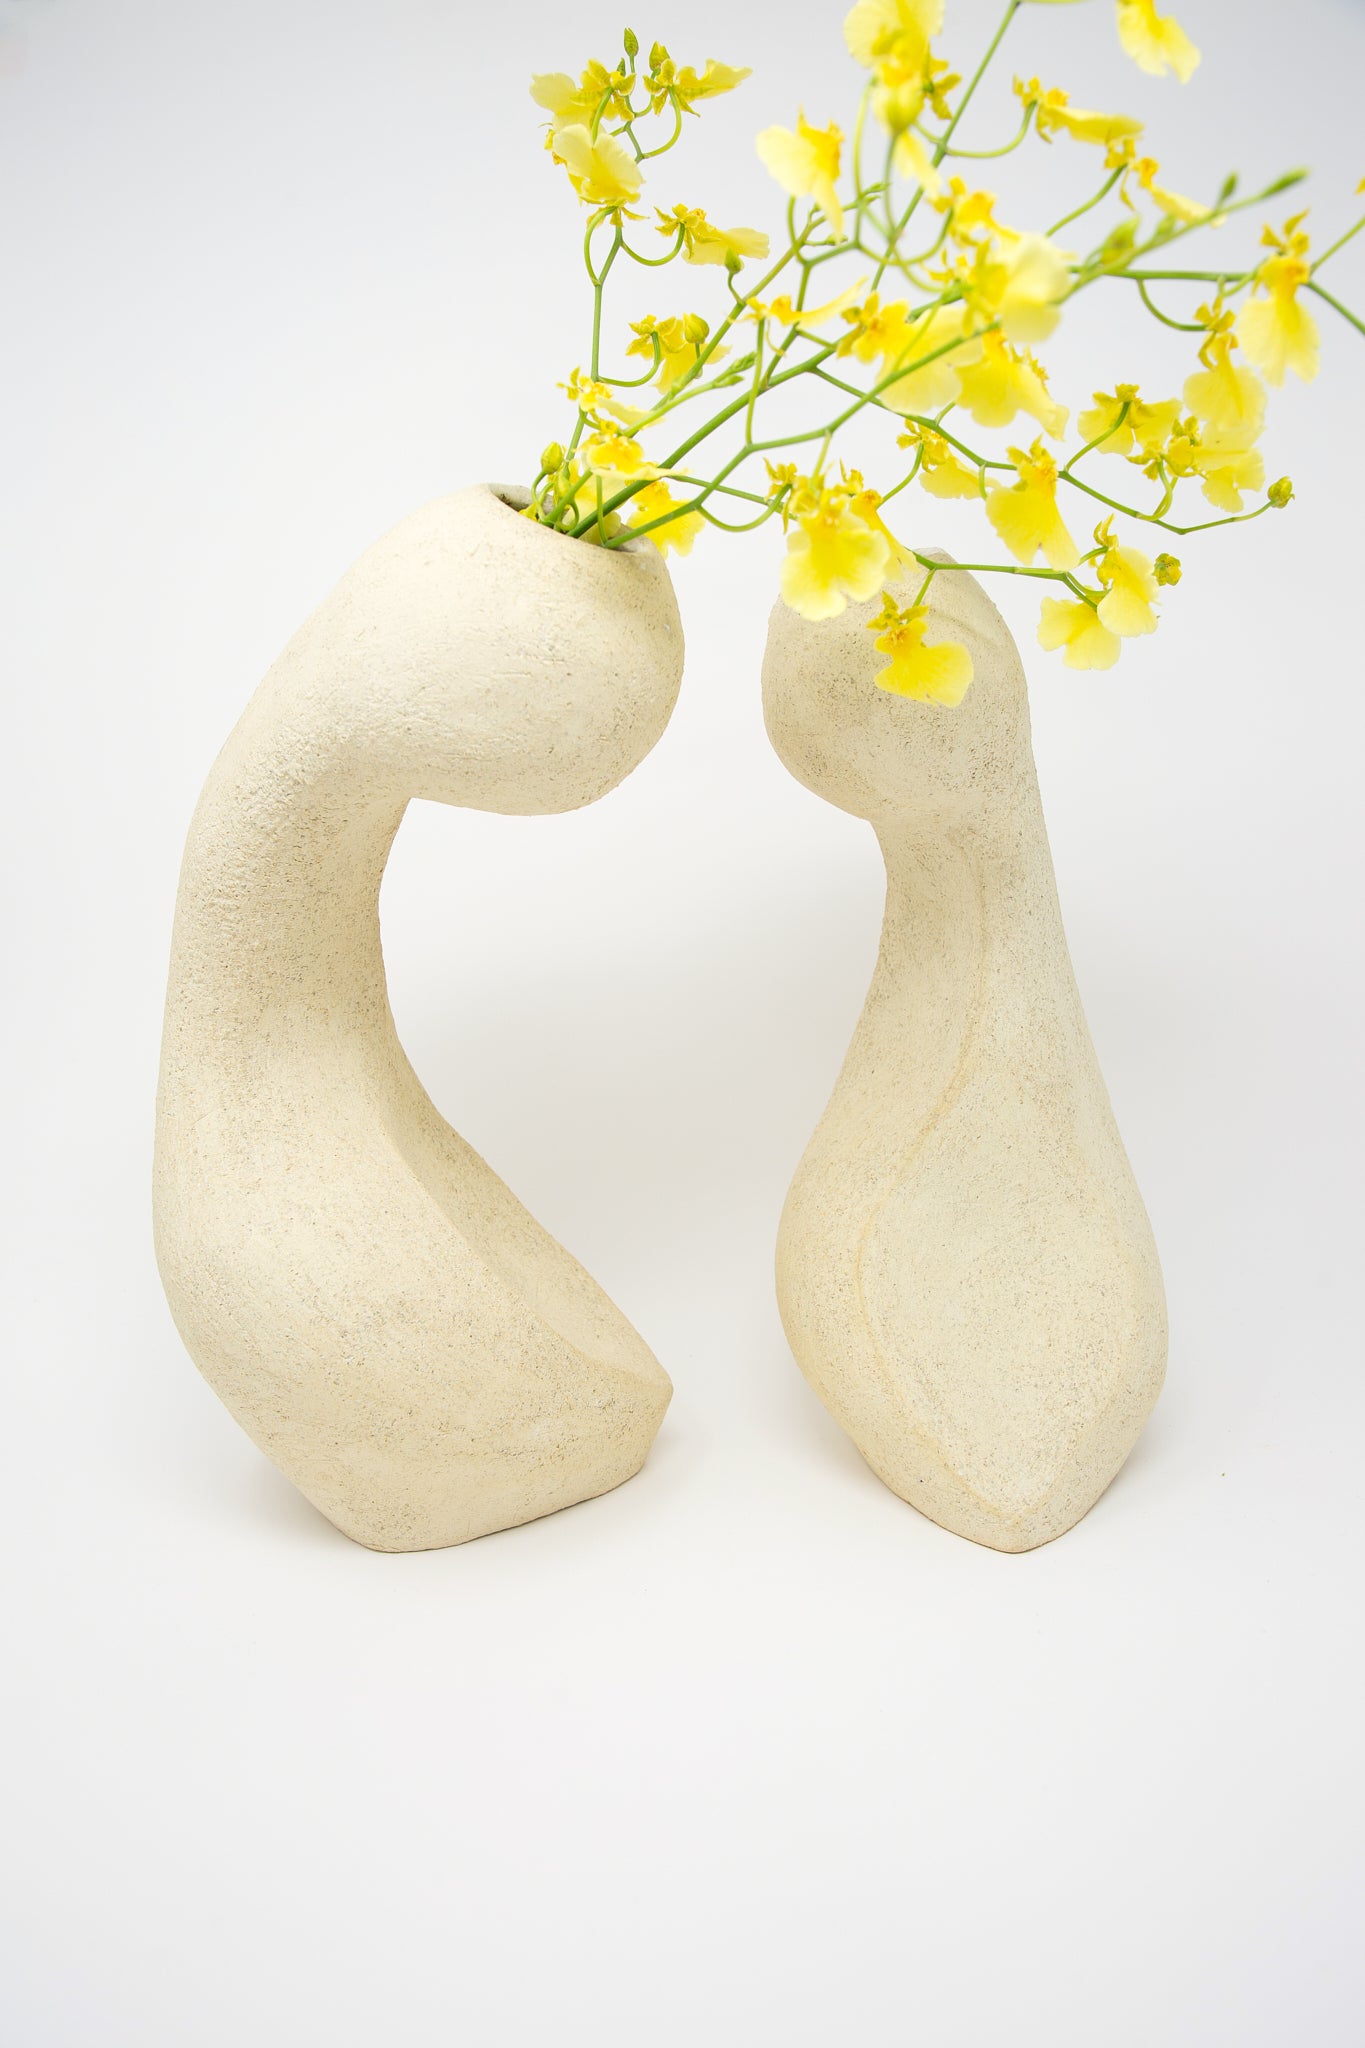 Two floral arrangements displayed in Large Hand Built Vessel No. 000711 Bud Vase made from textured white sculpture clay by Lost Quarry.